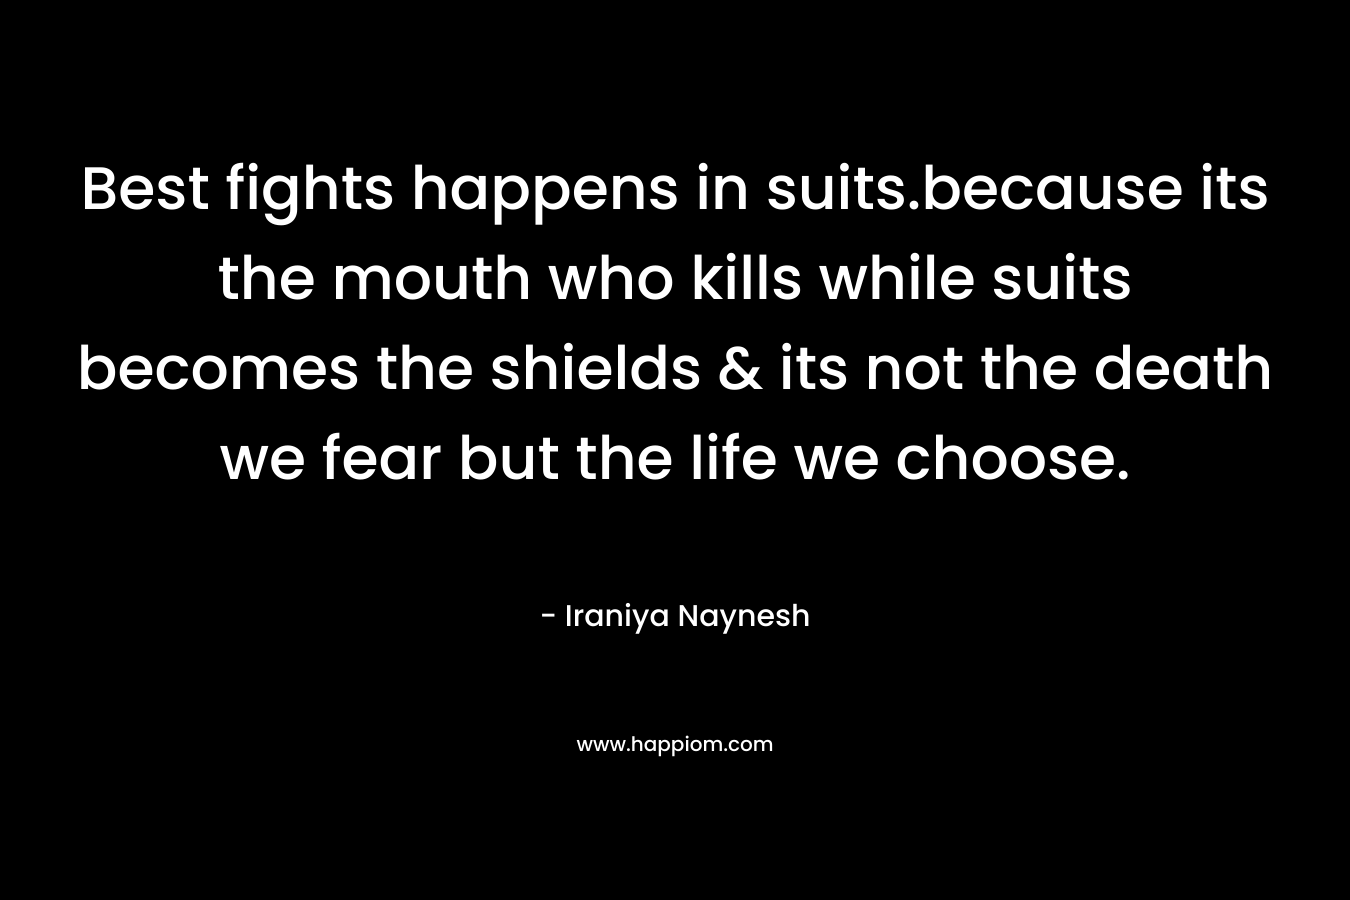 Best fights happens in suits.because its the mouth who kills while suits becomes the shields & its not the death we fear but the life we choose. – Iraniya Naynesh